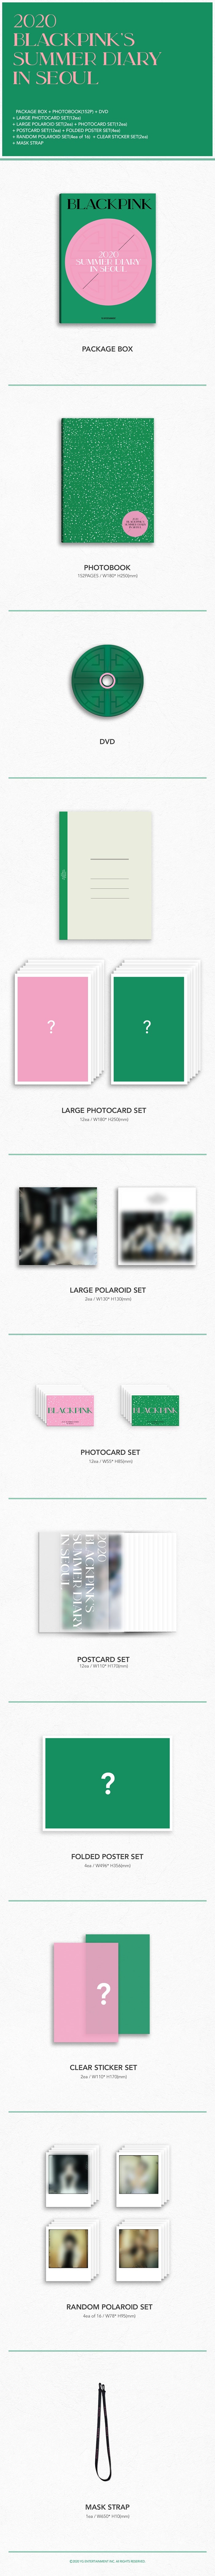 1 DVD
1 Photo Book (152 pages)
1 Large Photo Card Set (12 cards)
2 Large Polaroids
1 Photo Card Set (12 cards)
1 Postcard ...